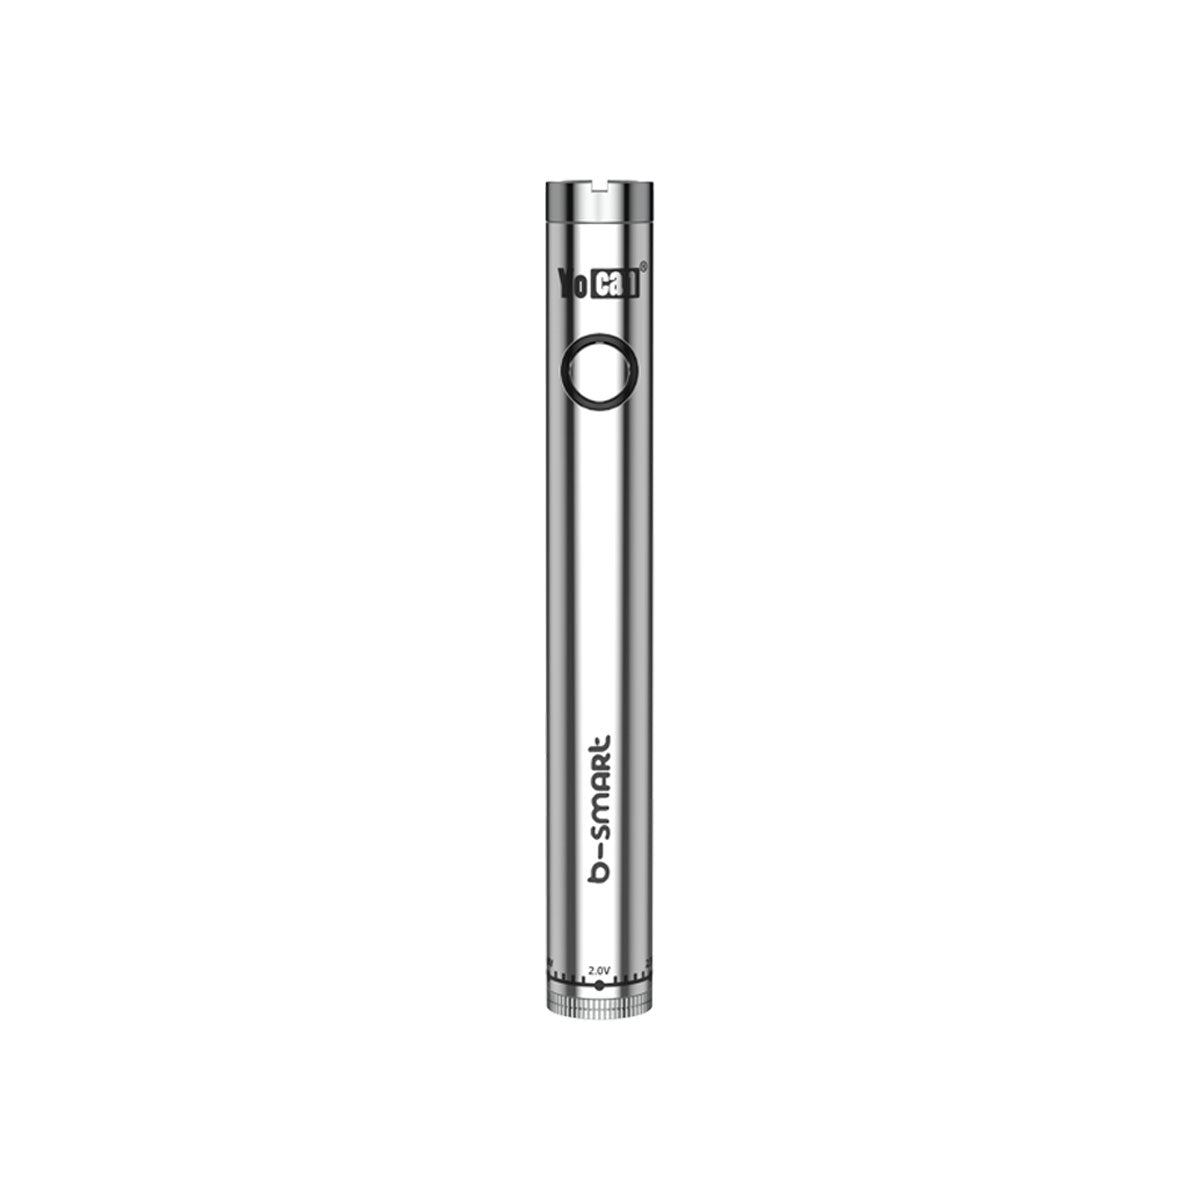 Yocan B-Smart Battery Vaporizers Yocan Silver With Charger  